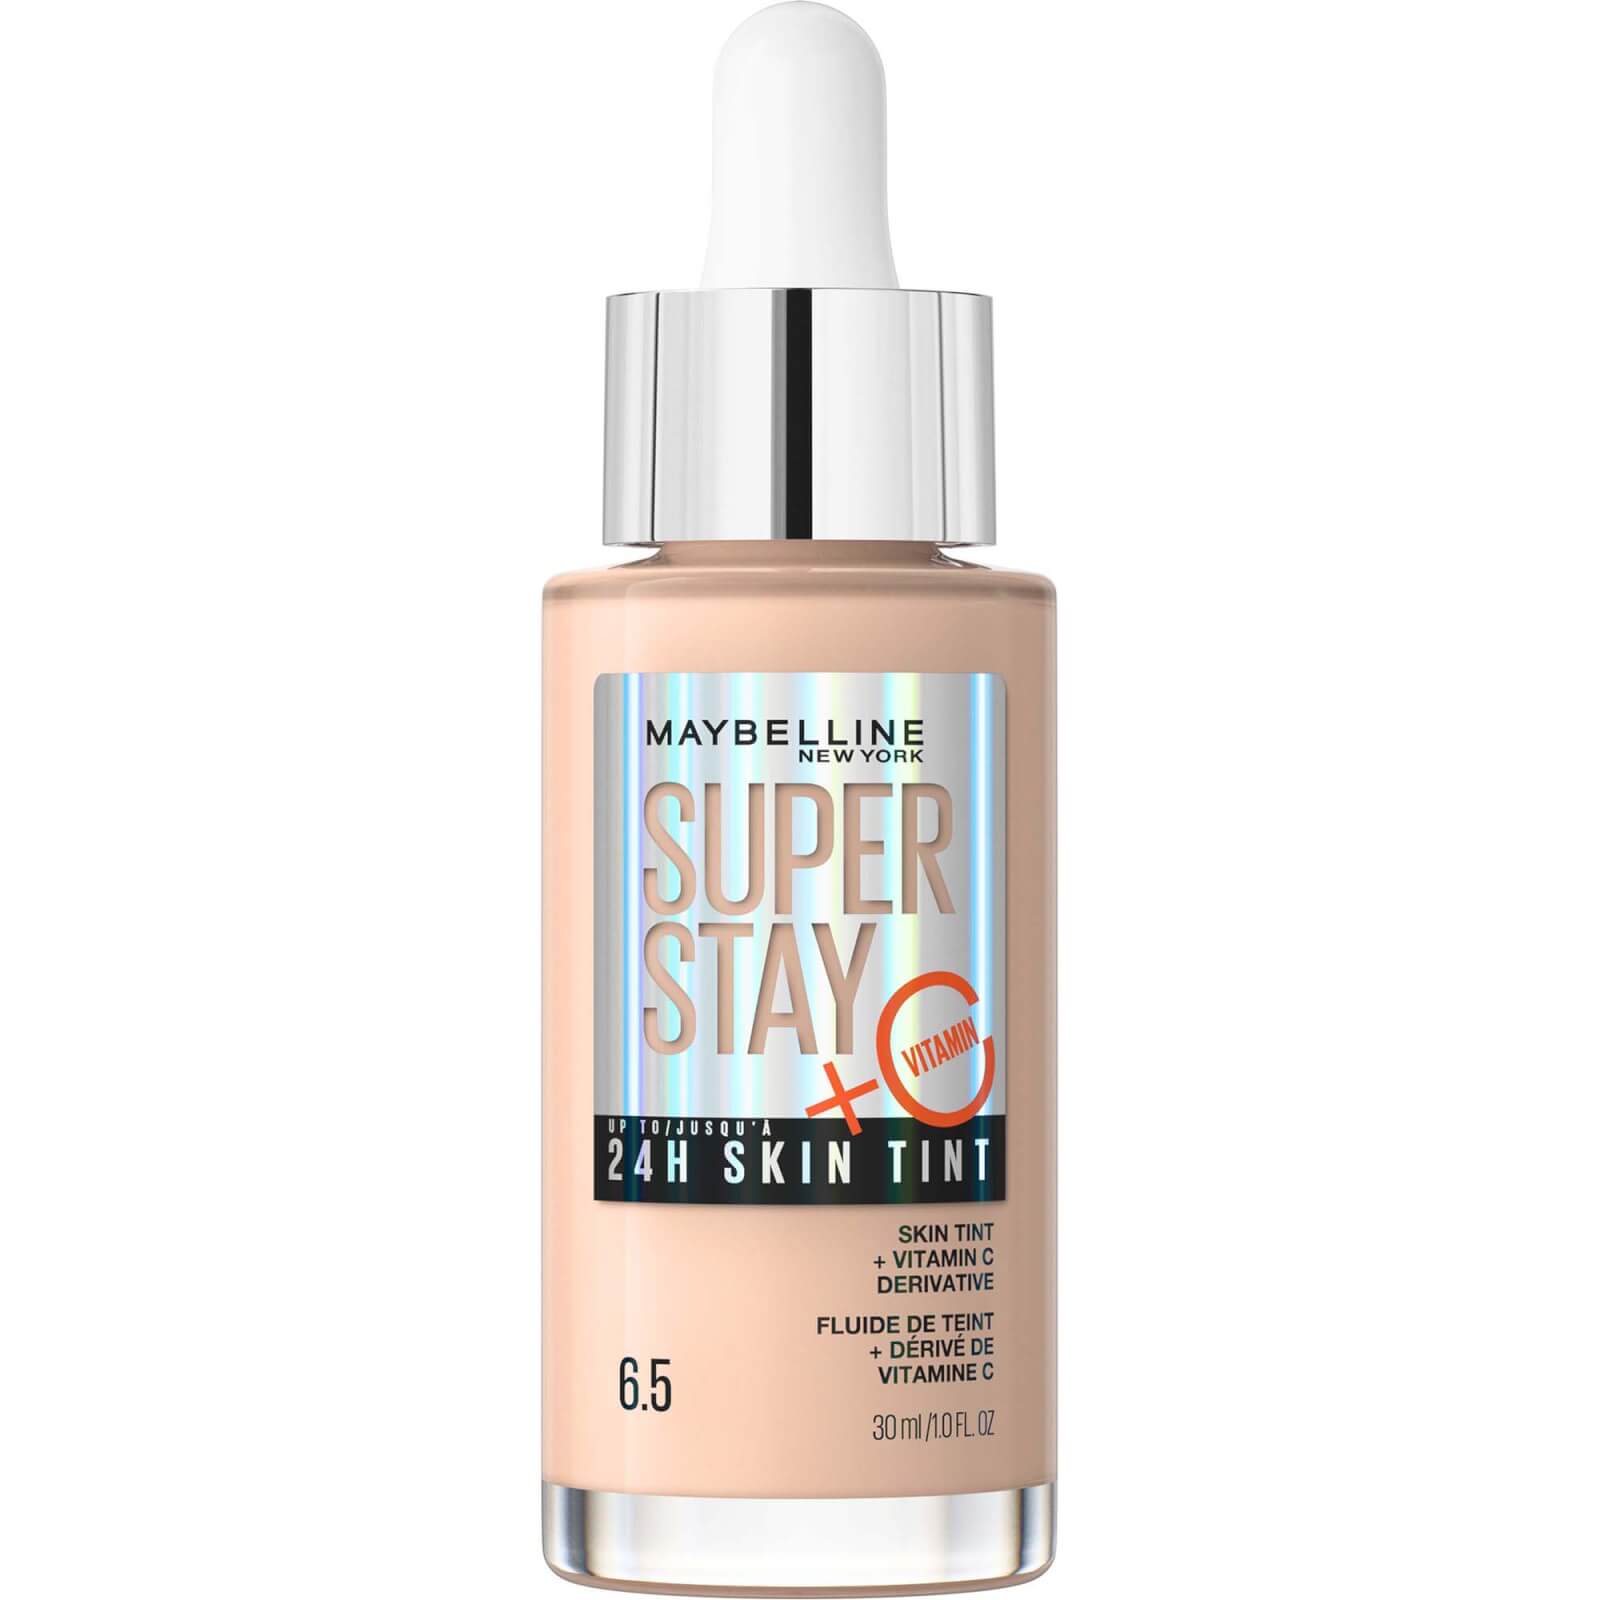 Maybelline Super Stay Up To 24h Skin Tint Foundation + Vitamin C 30ml (various Shades) - 6.5 In Neutral